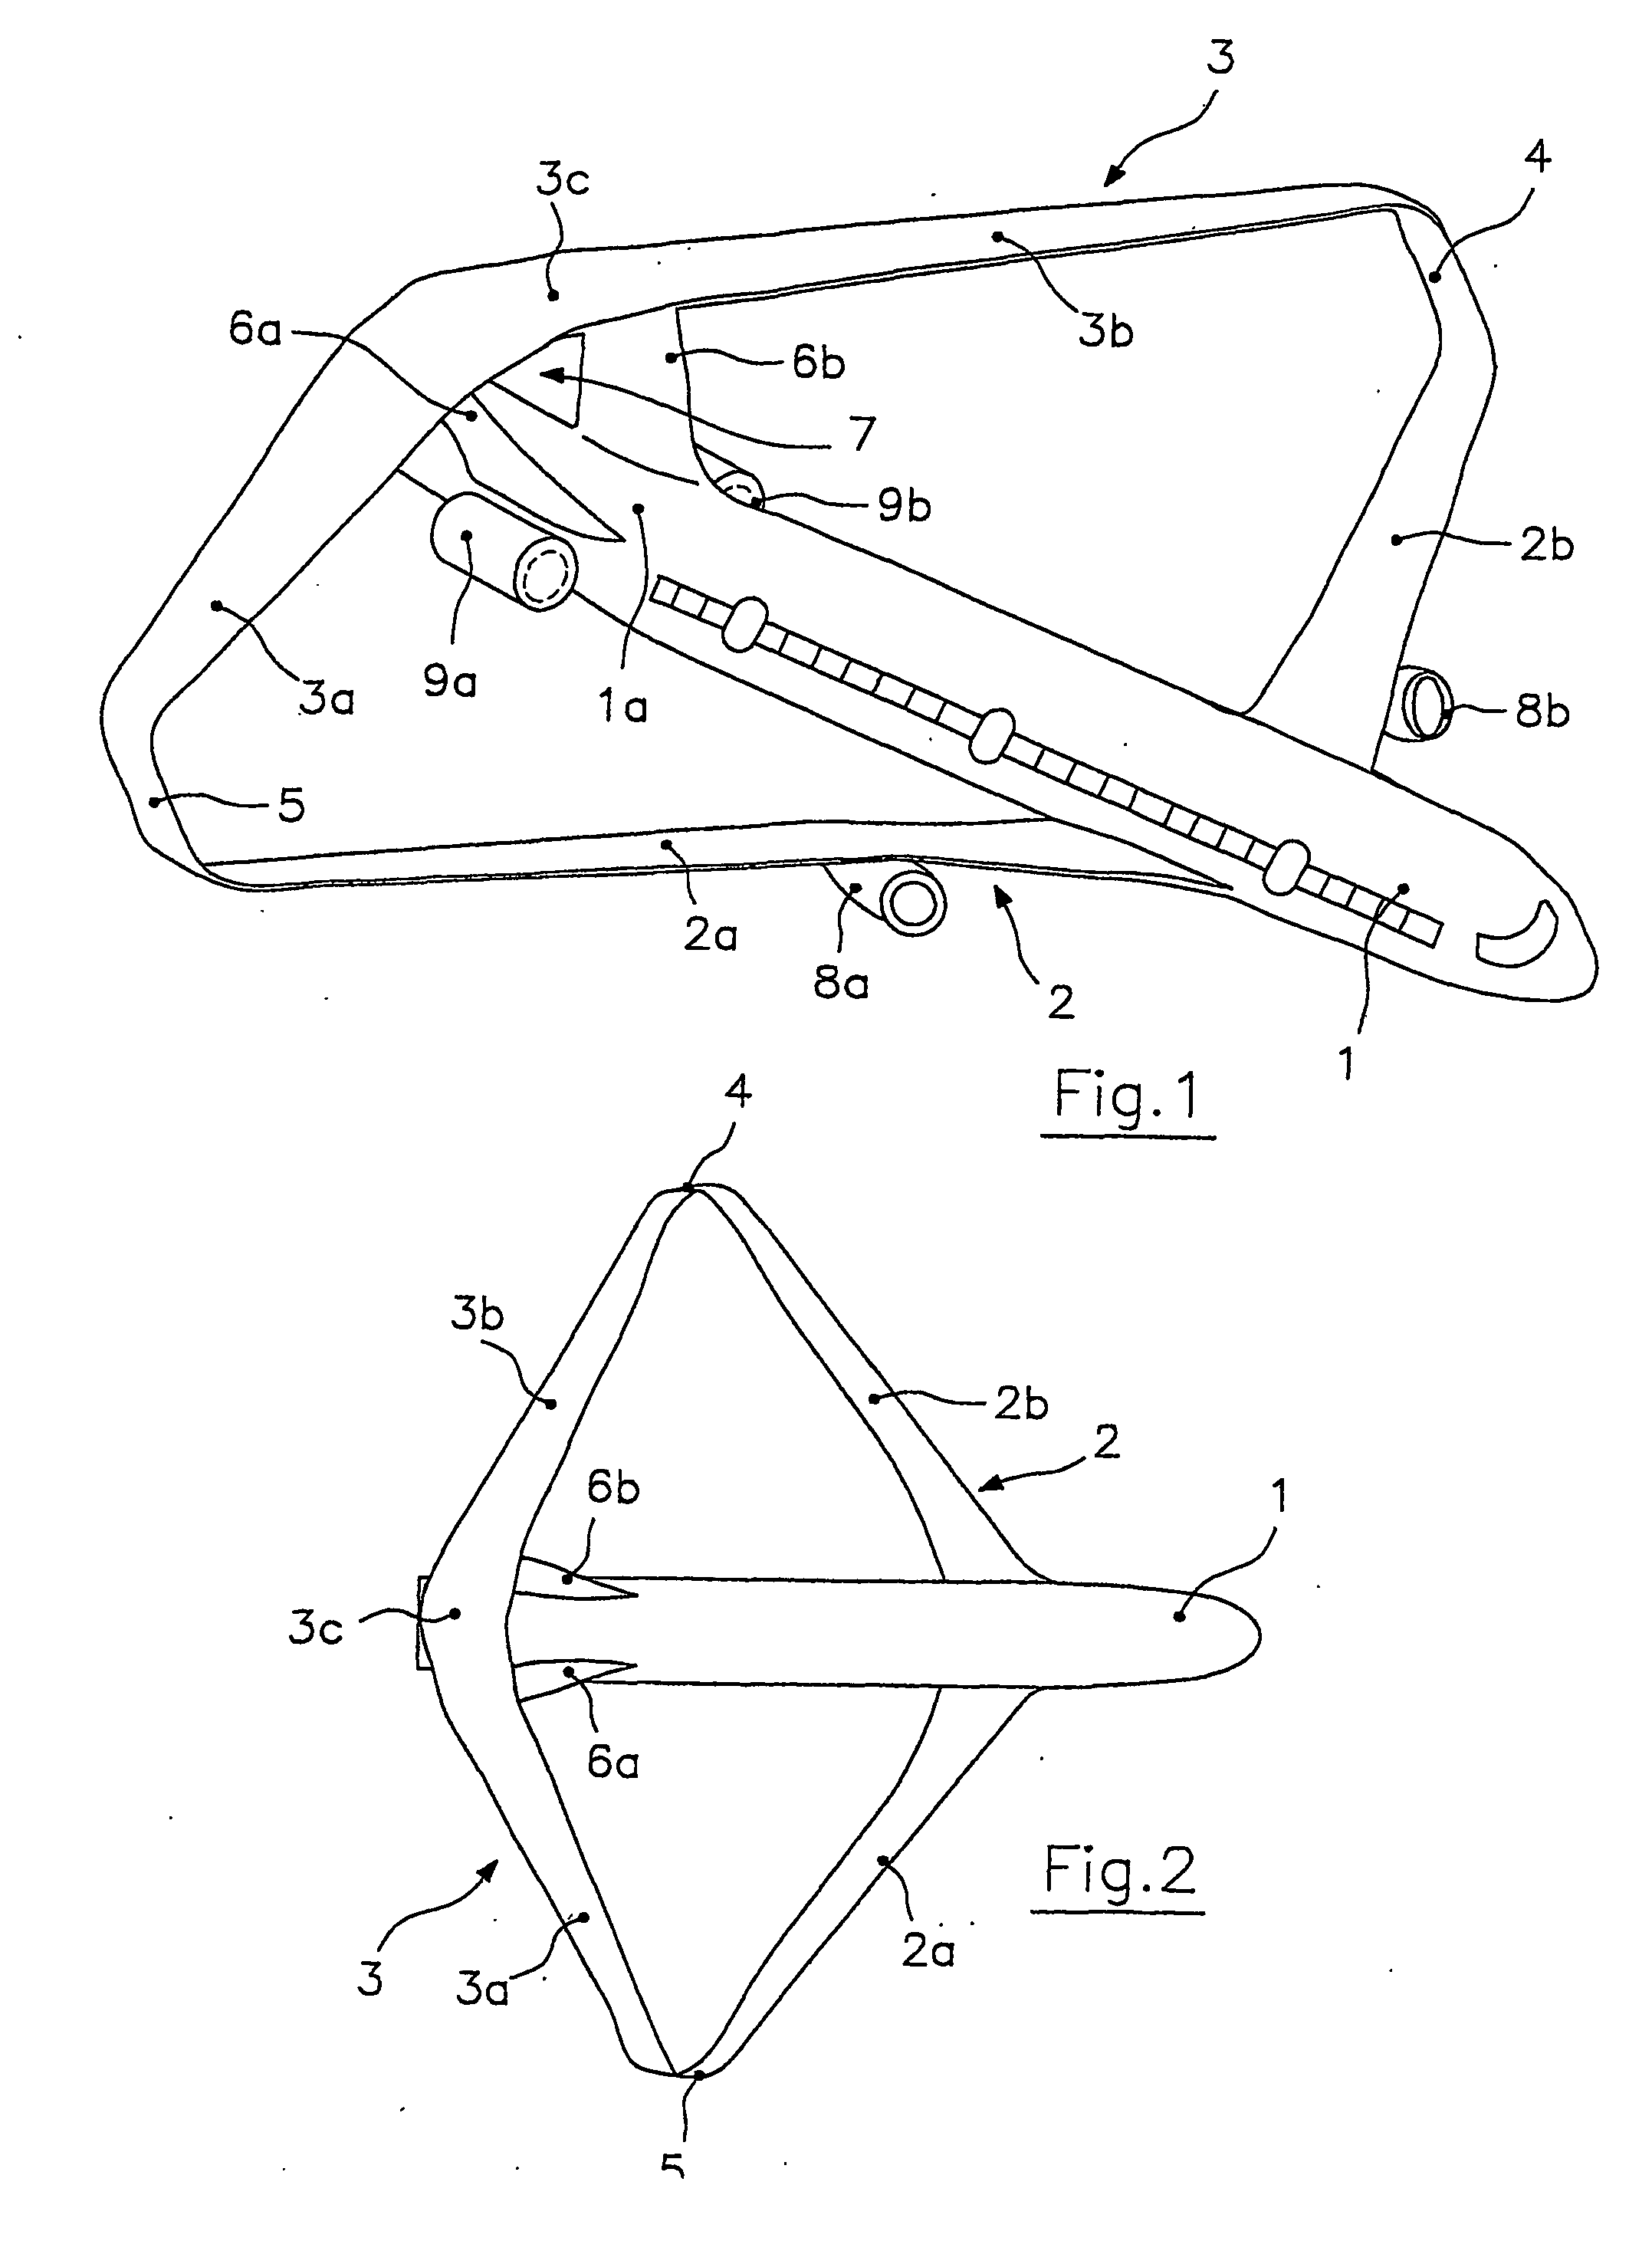 Swept-wing box-type aircraft with high fligh static stability